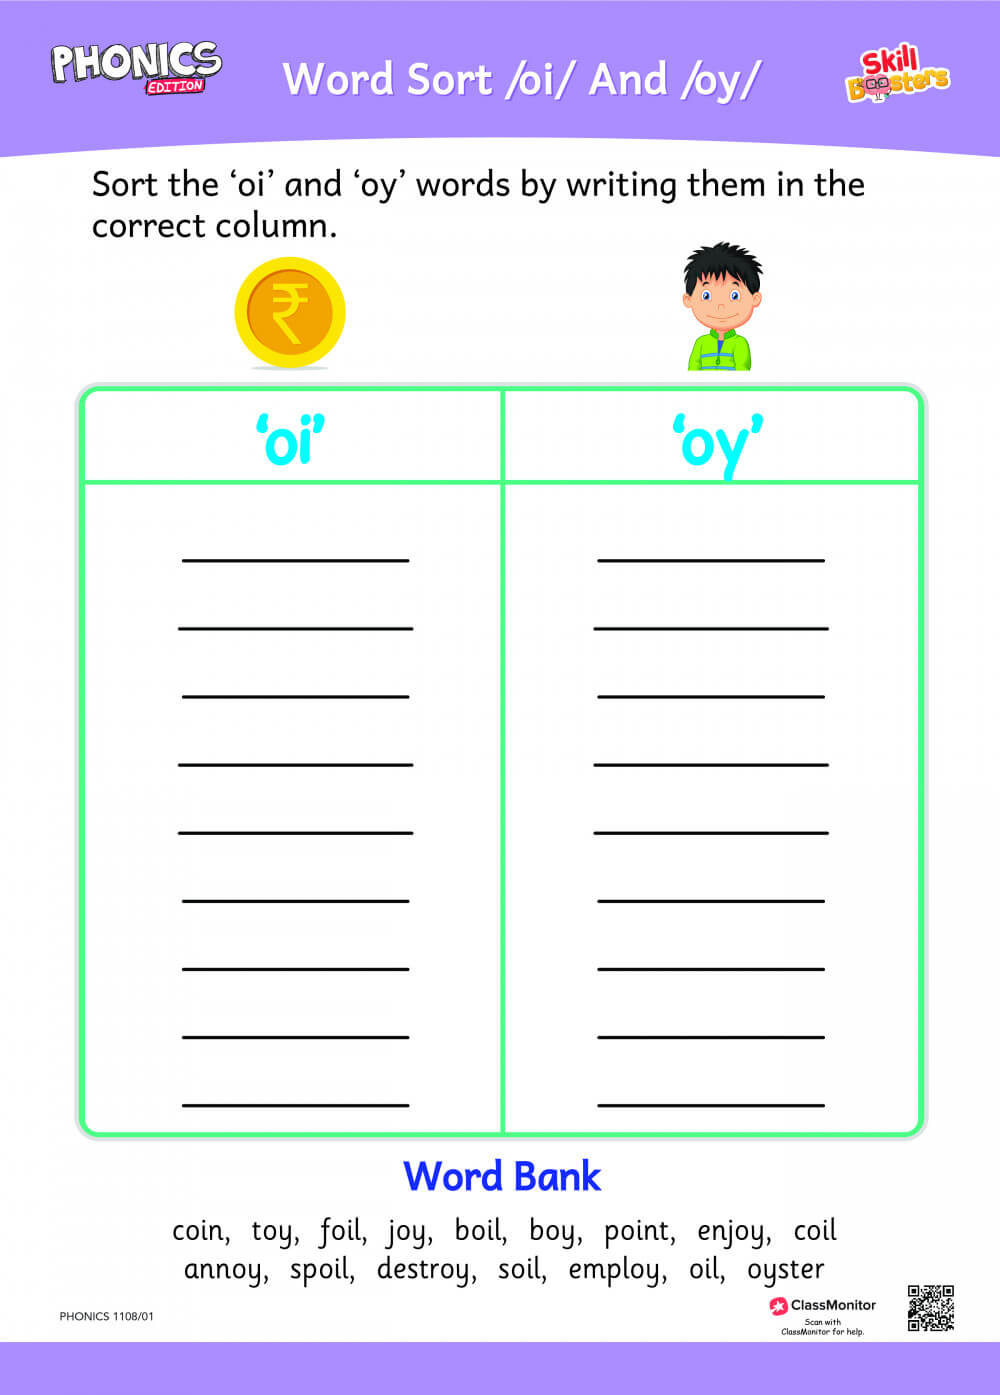 Worksheet - Word Sort "oi" and "oy"